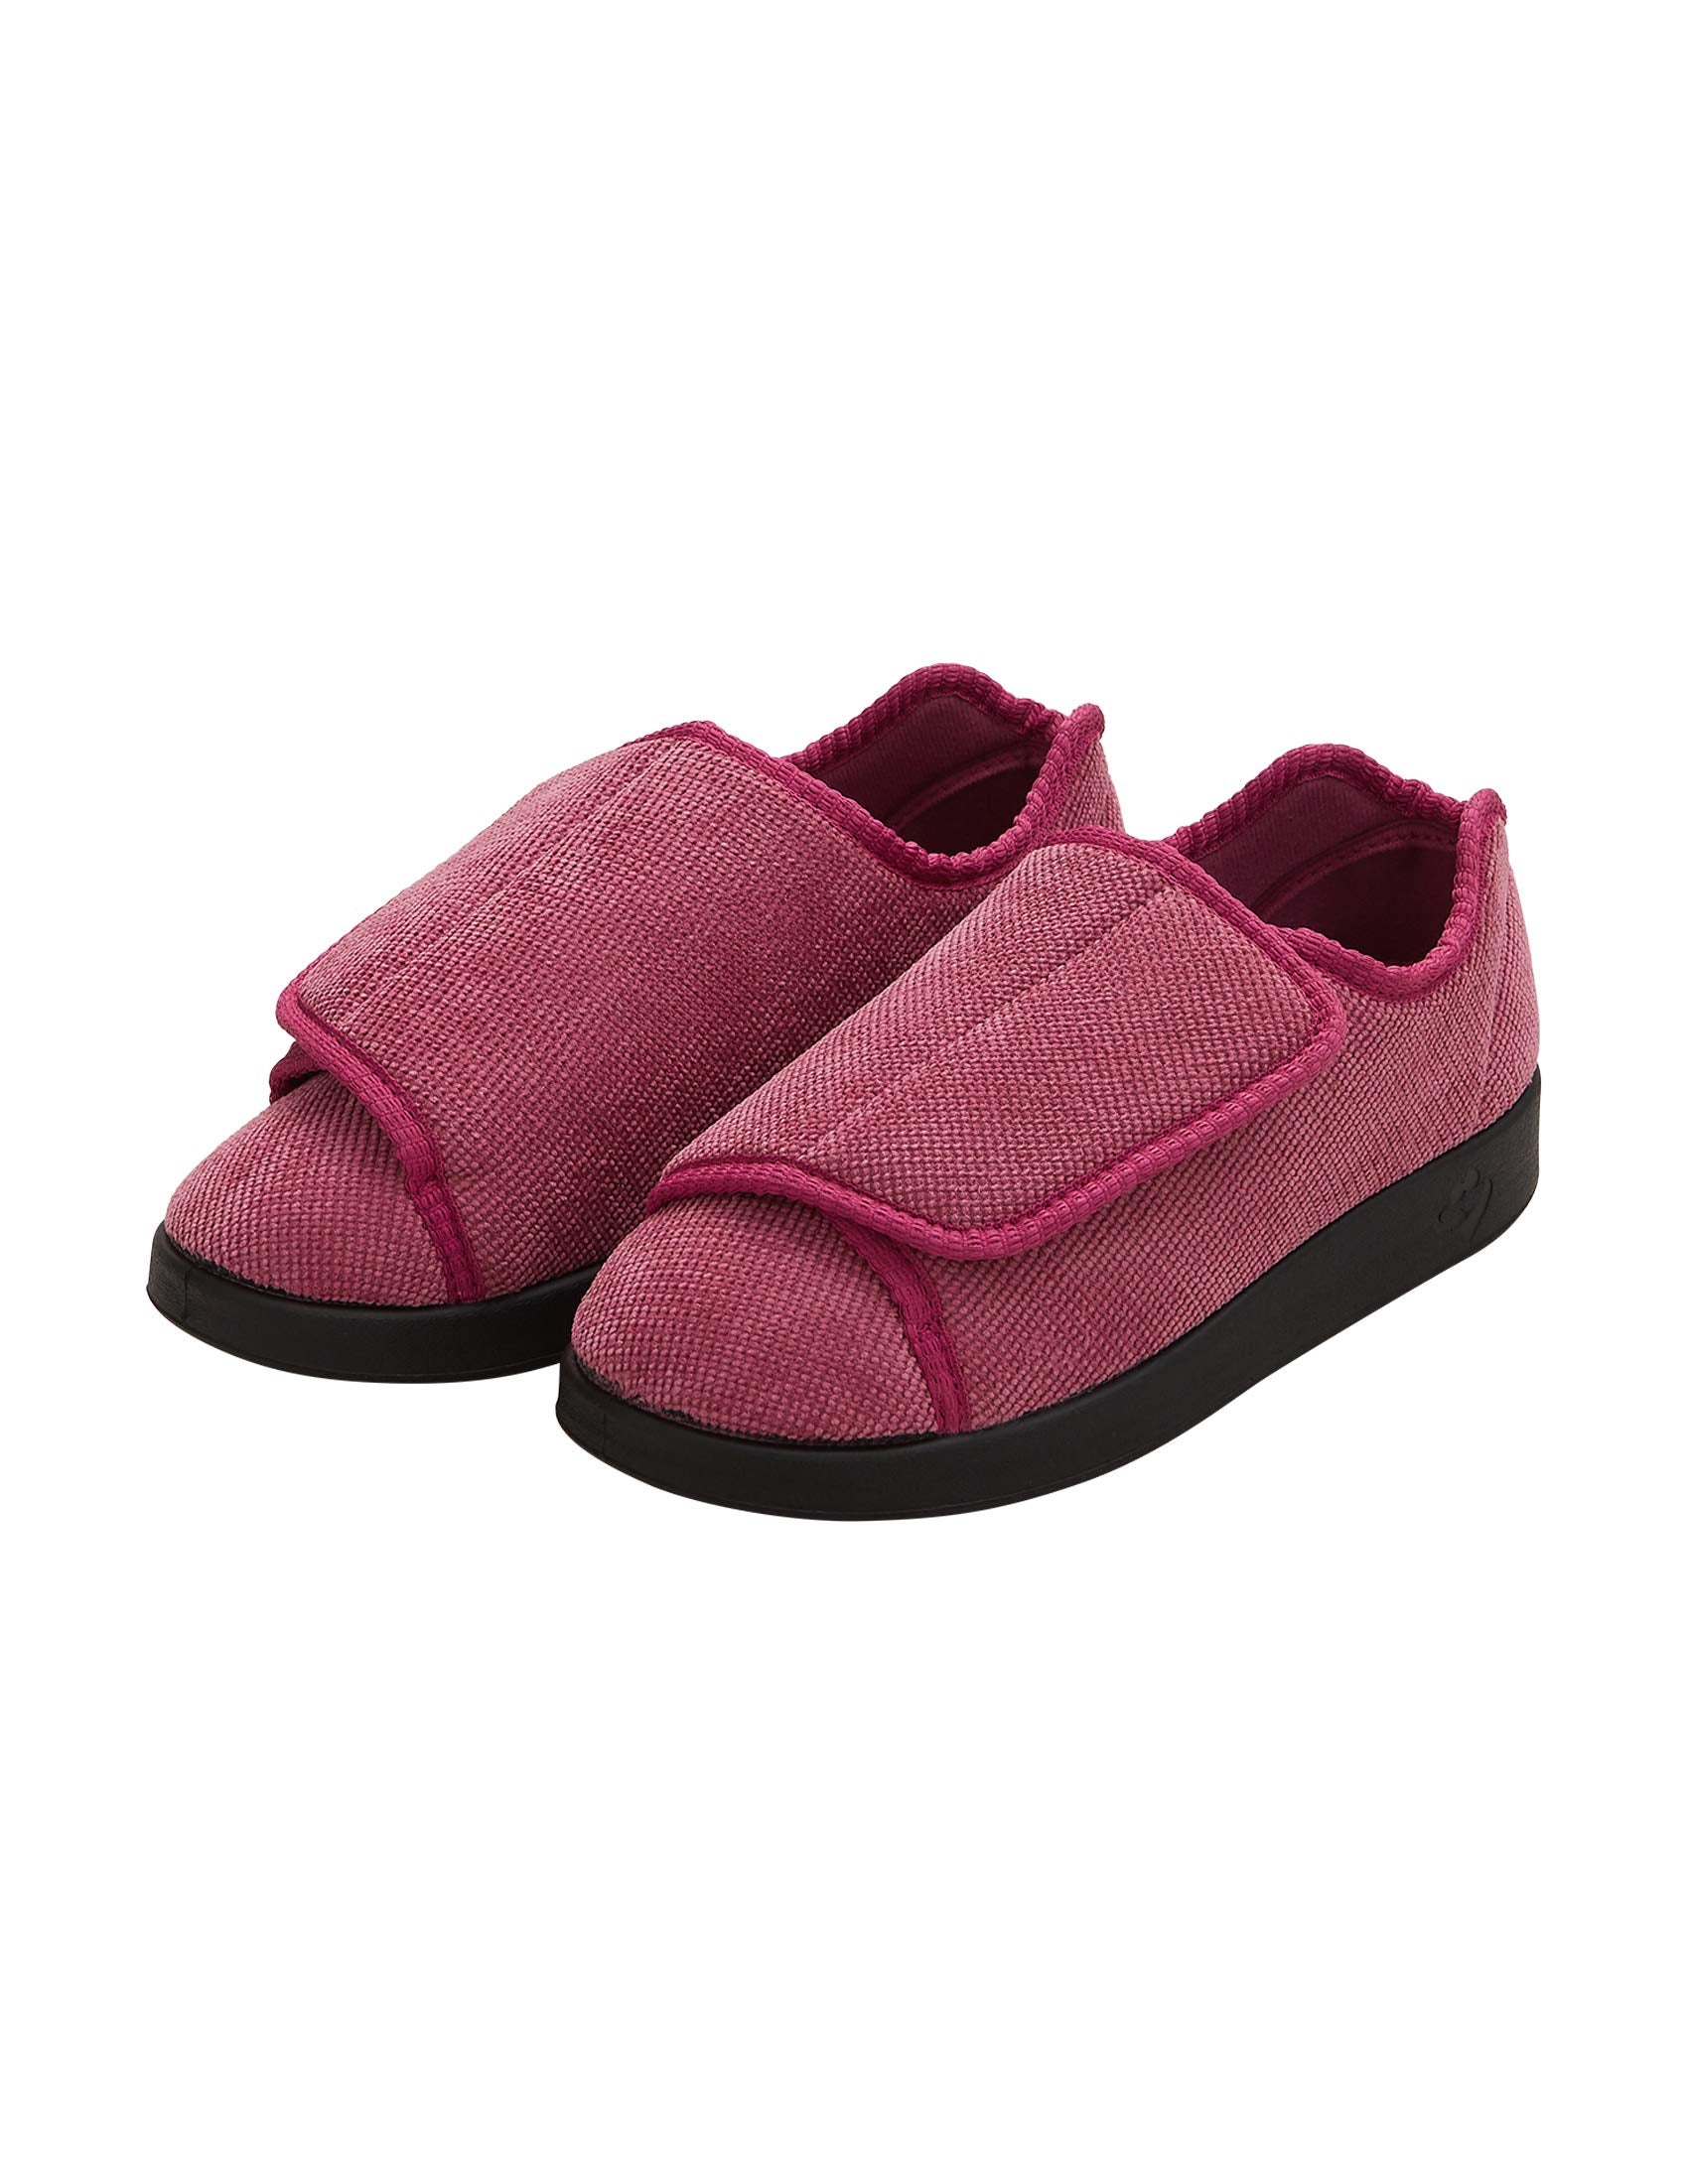 Silverts Women’s Double-Extra Wide Easy Closure Slipper - Diabetic Shoes for Women, Gifts for Seniors in Assisted Living - Helps Edema, Swollen Feet, Hammer Toes, Lymphedema - Dusty Rose/Black 10